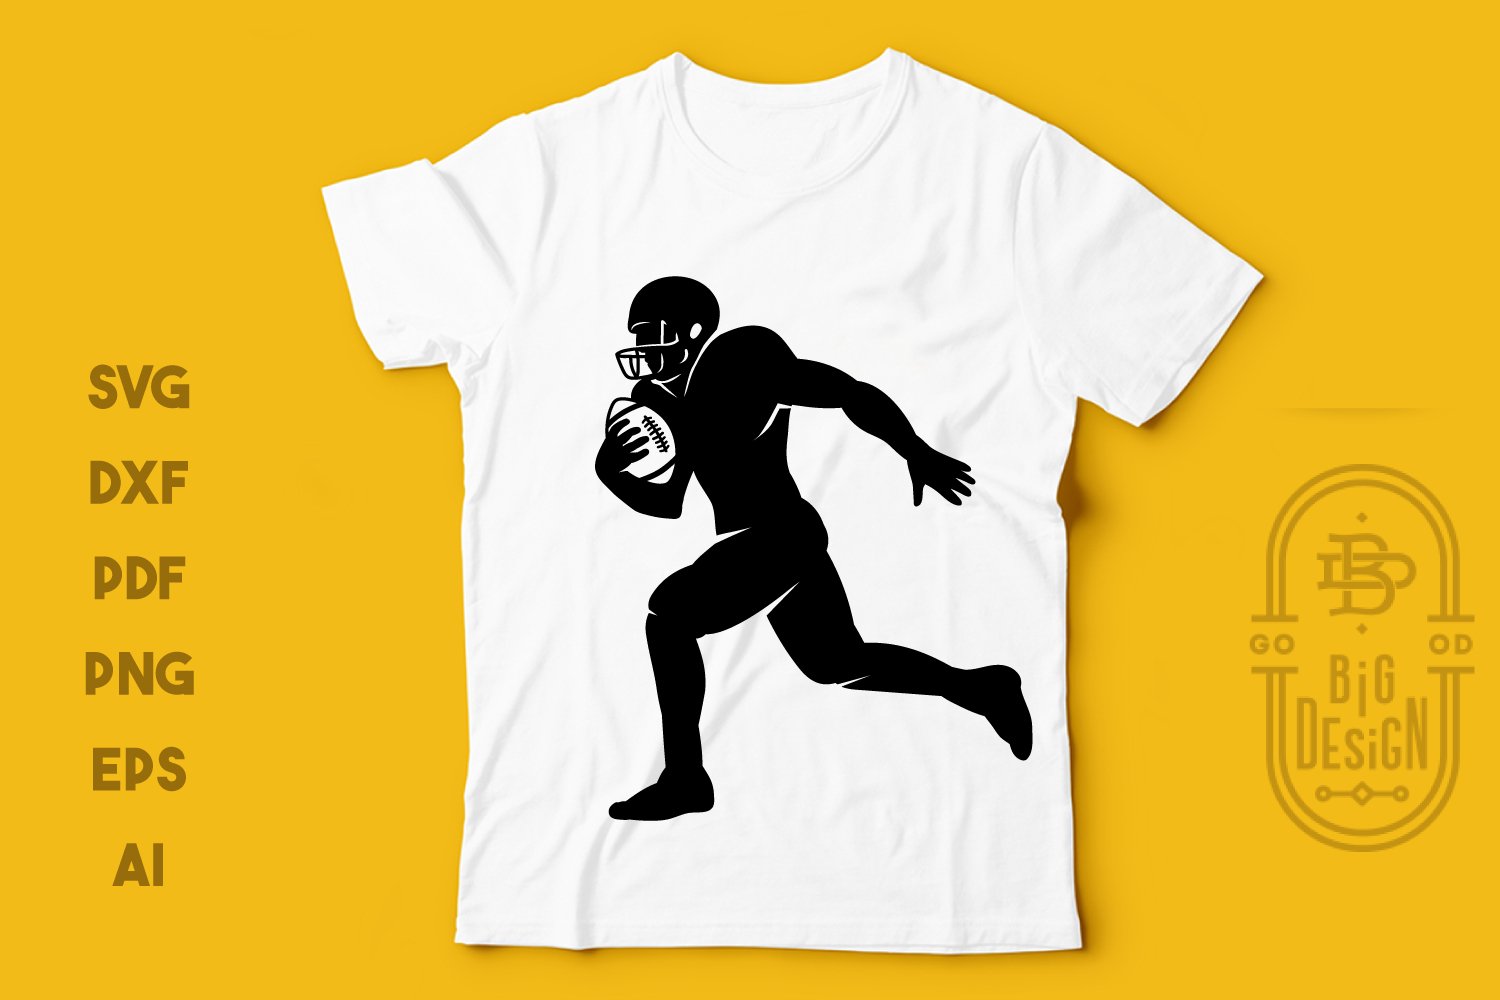 Classic white t-shirt with football player.